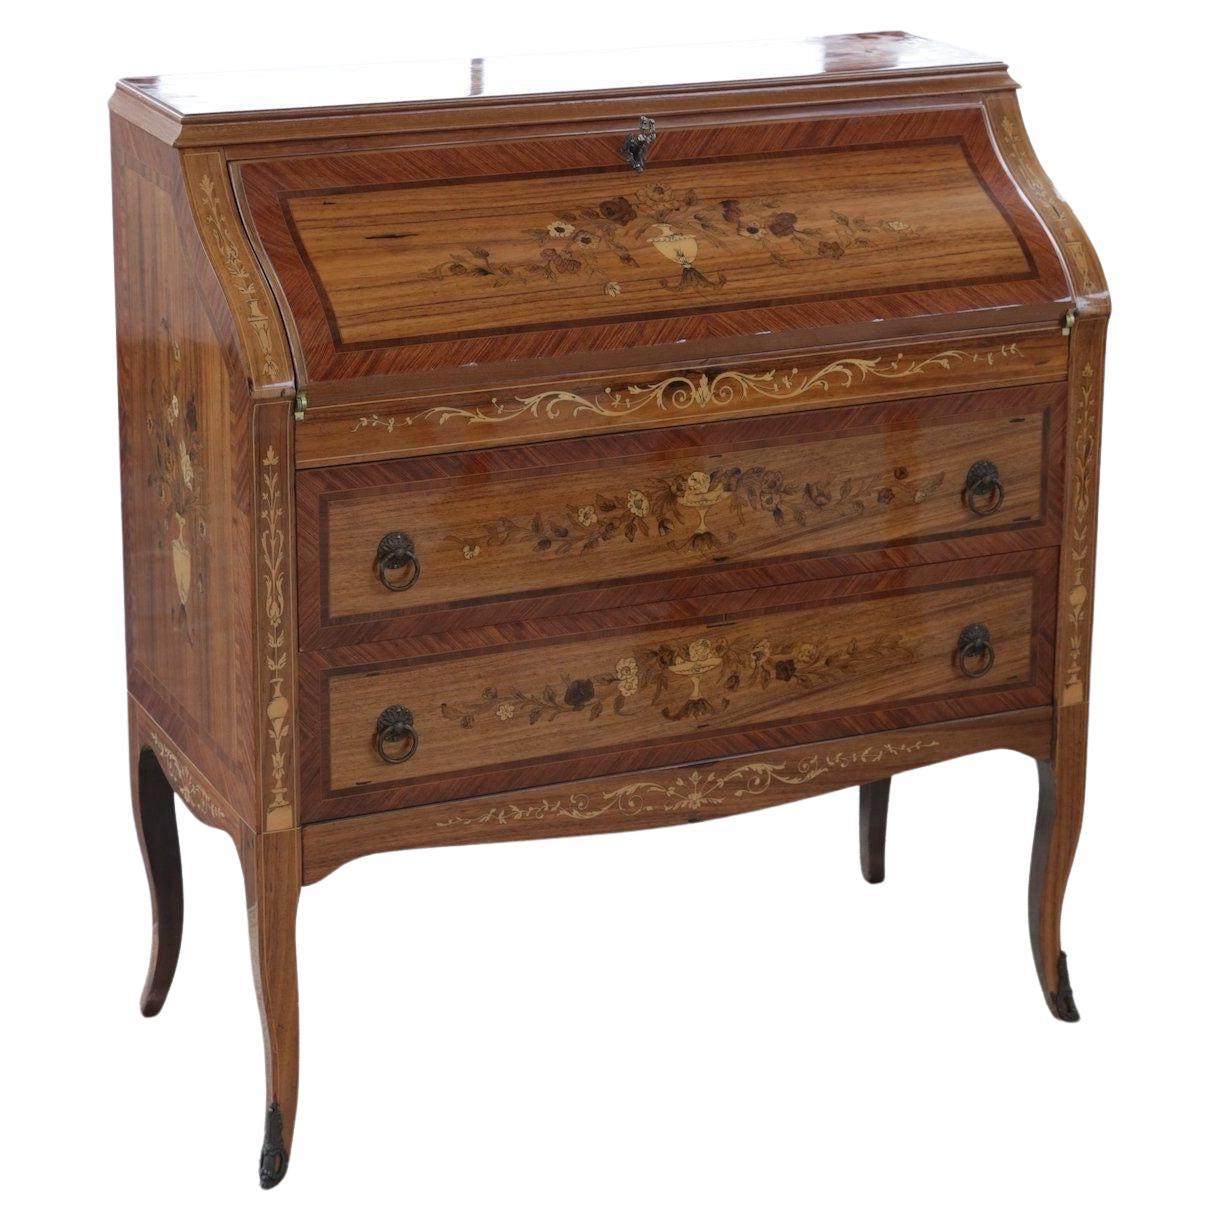 Stunning Lacquered Inlay Secretary with Gorgeous Hardware For Sale